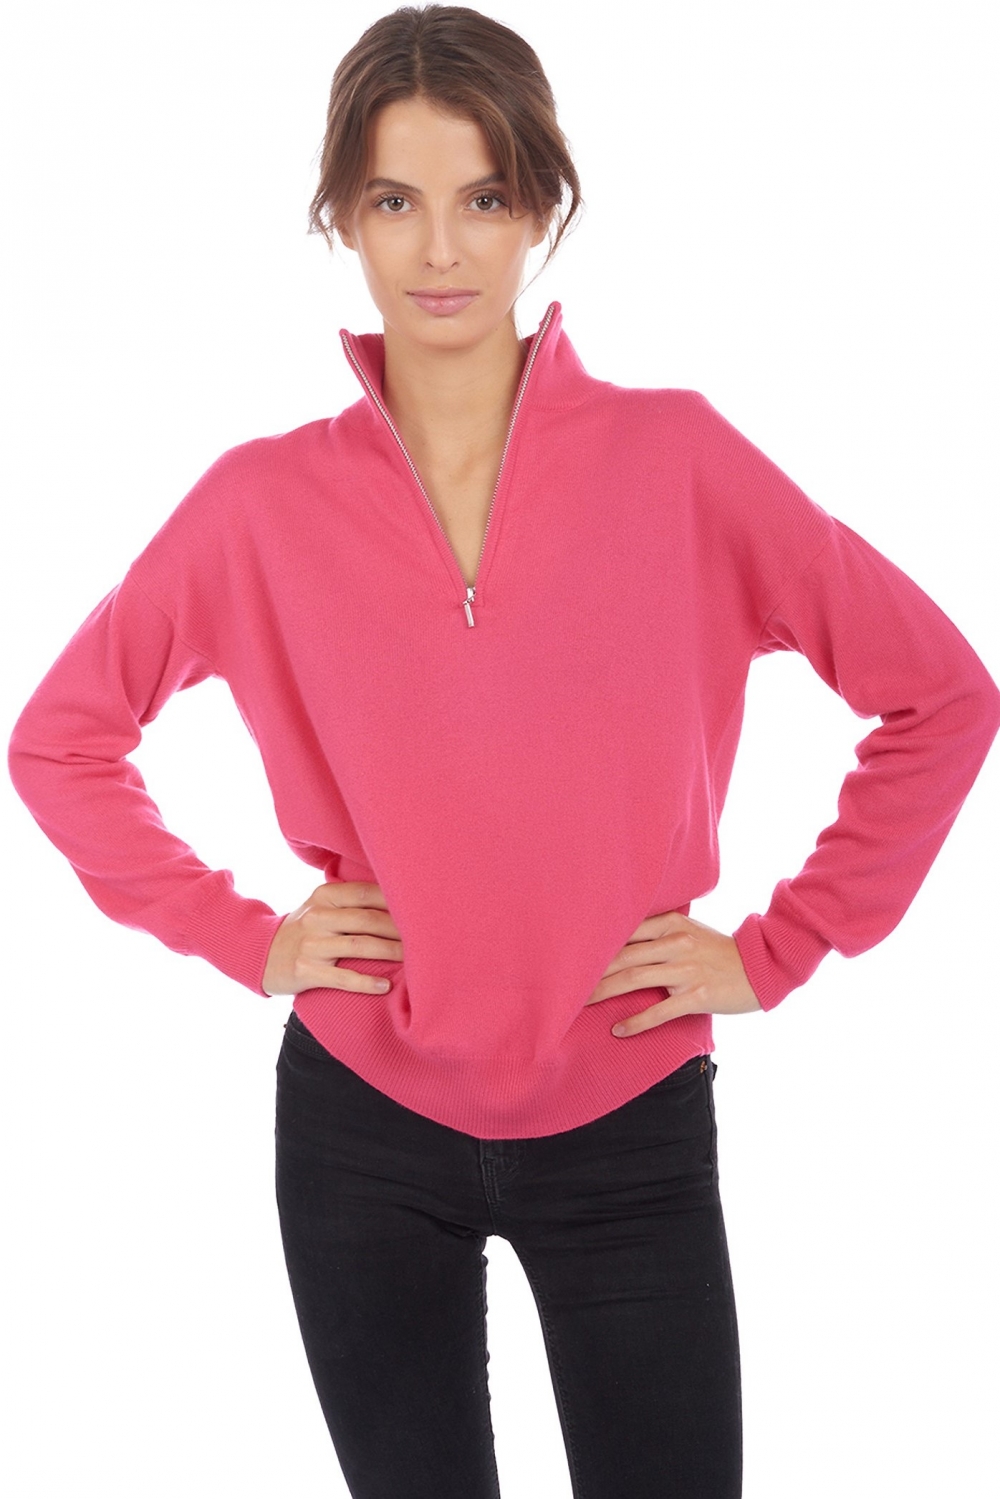 Cachemire pull femme col roule groseille rose shocking xl